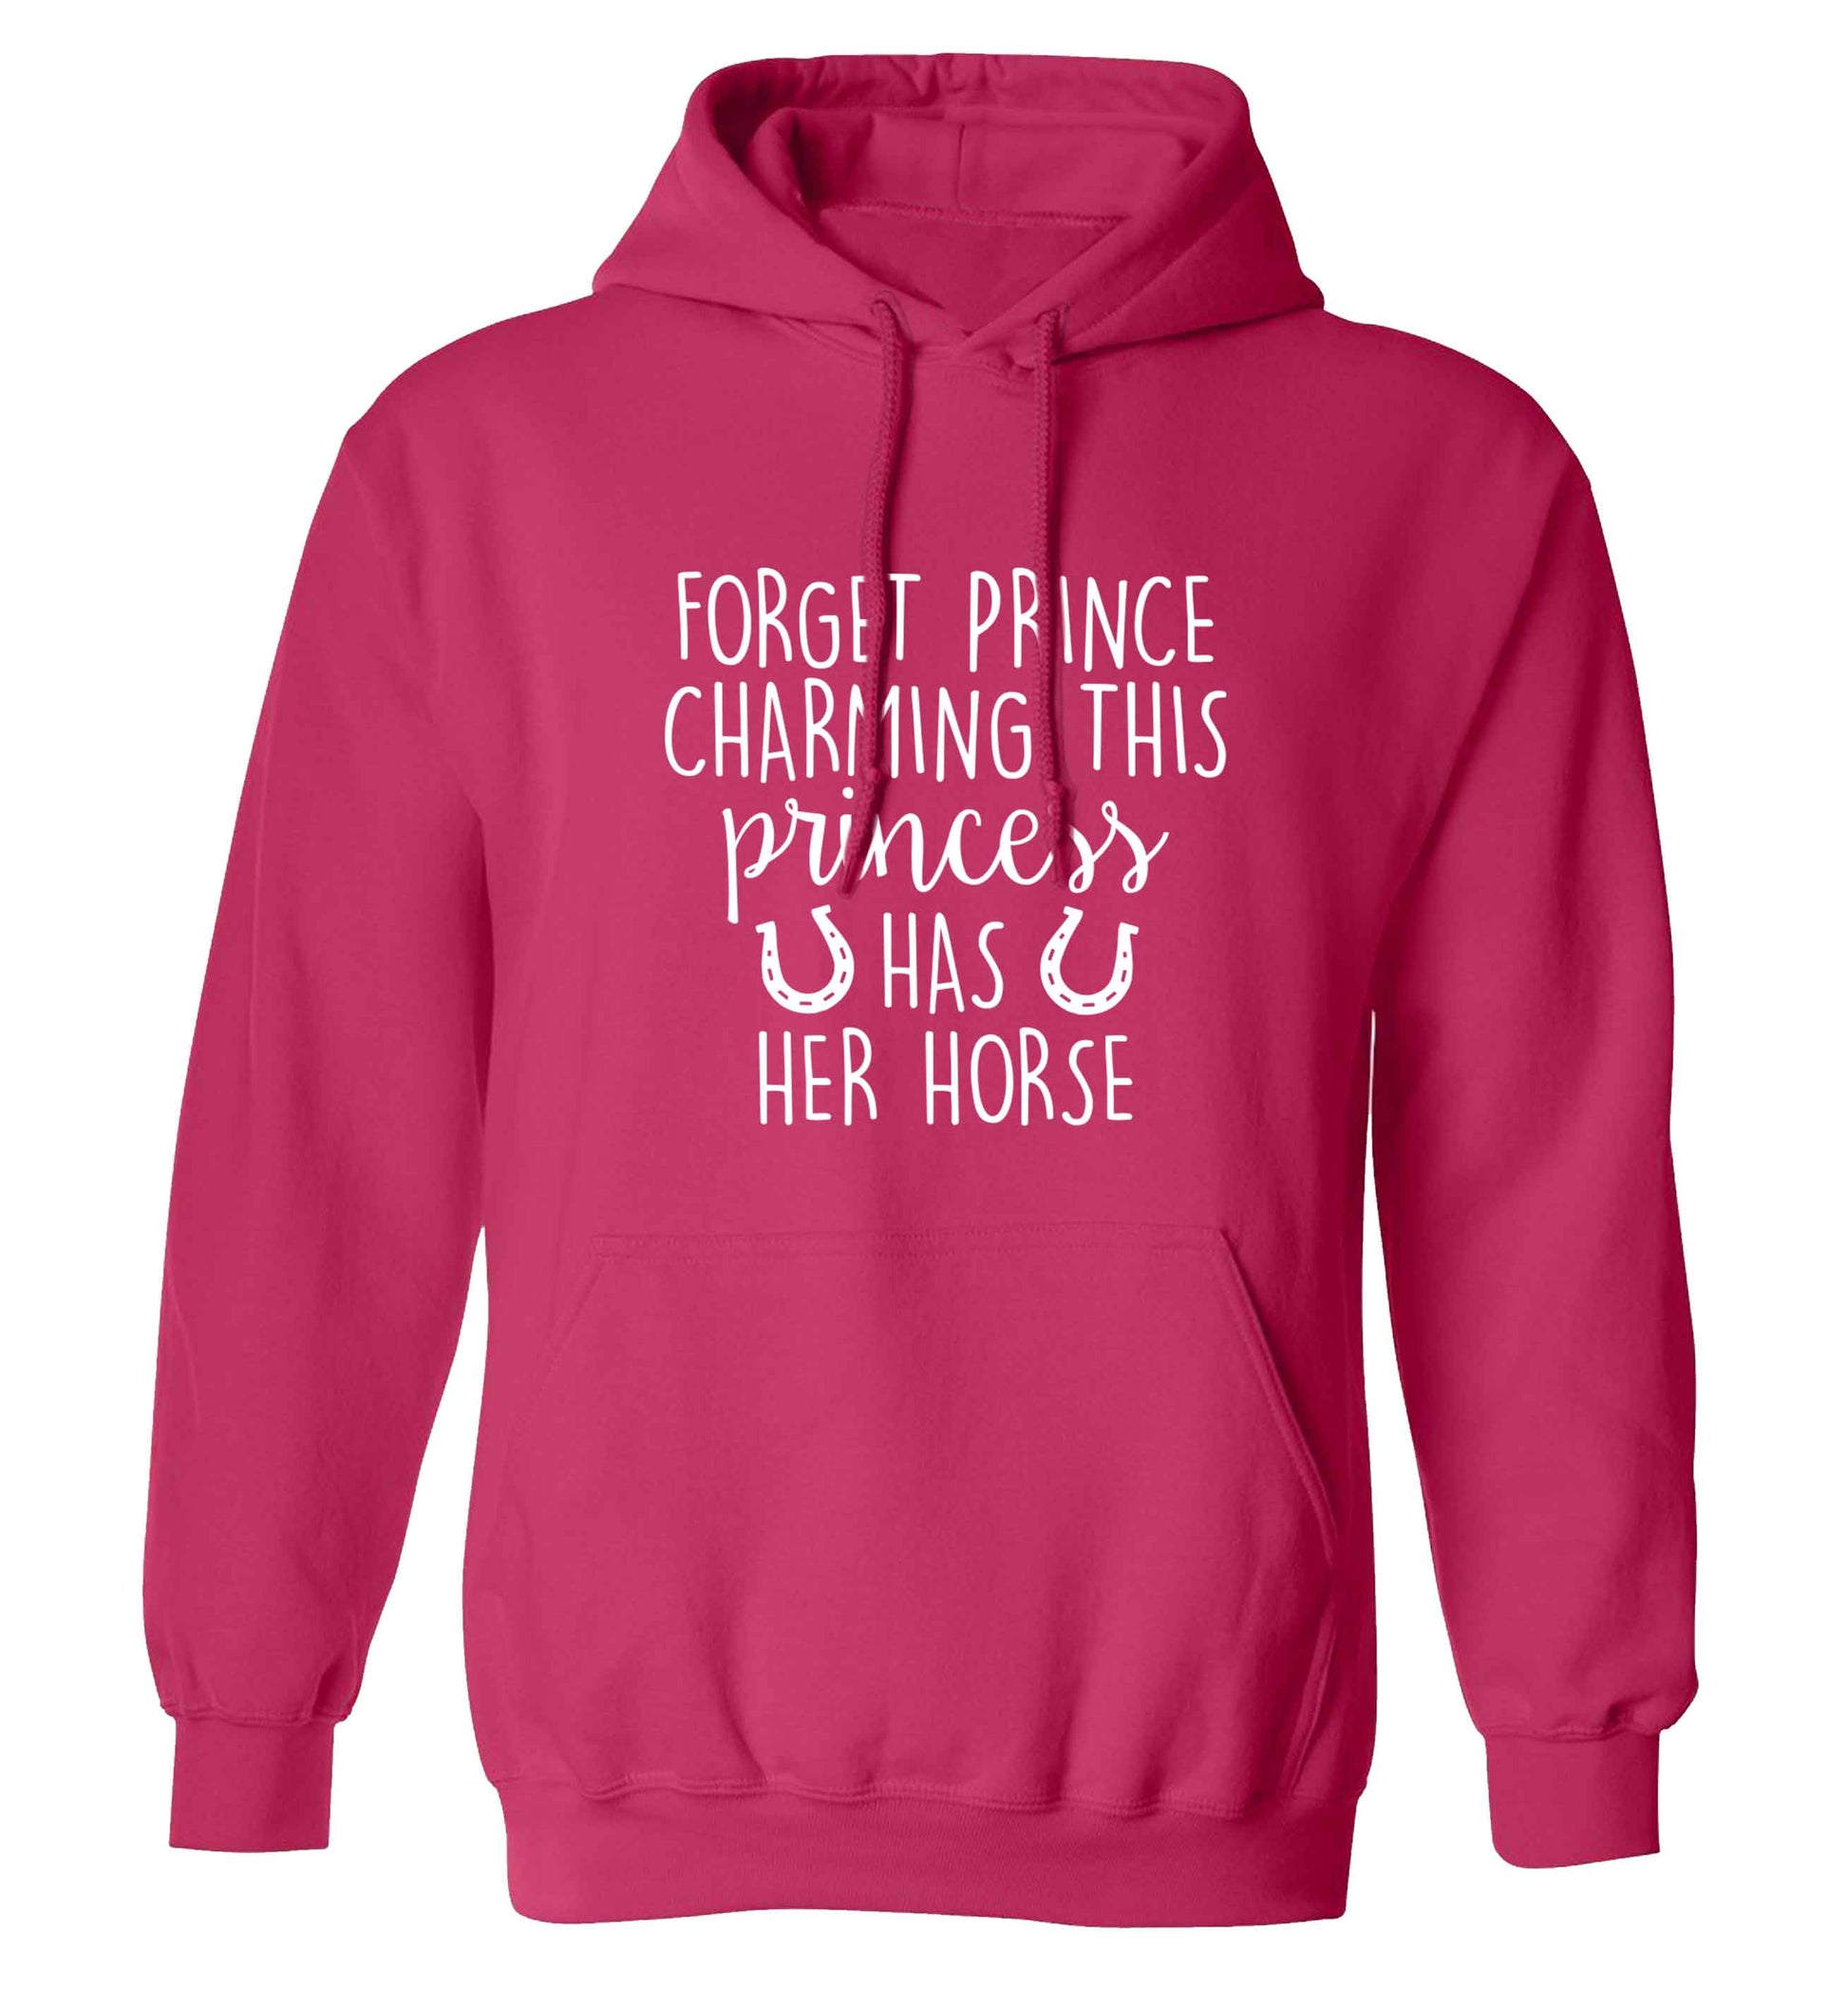 Forget prince charming this princess has her horse adults unisex pink hoodie 2XL